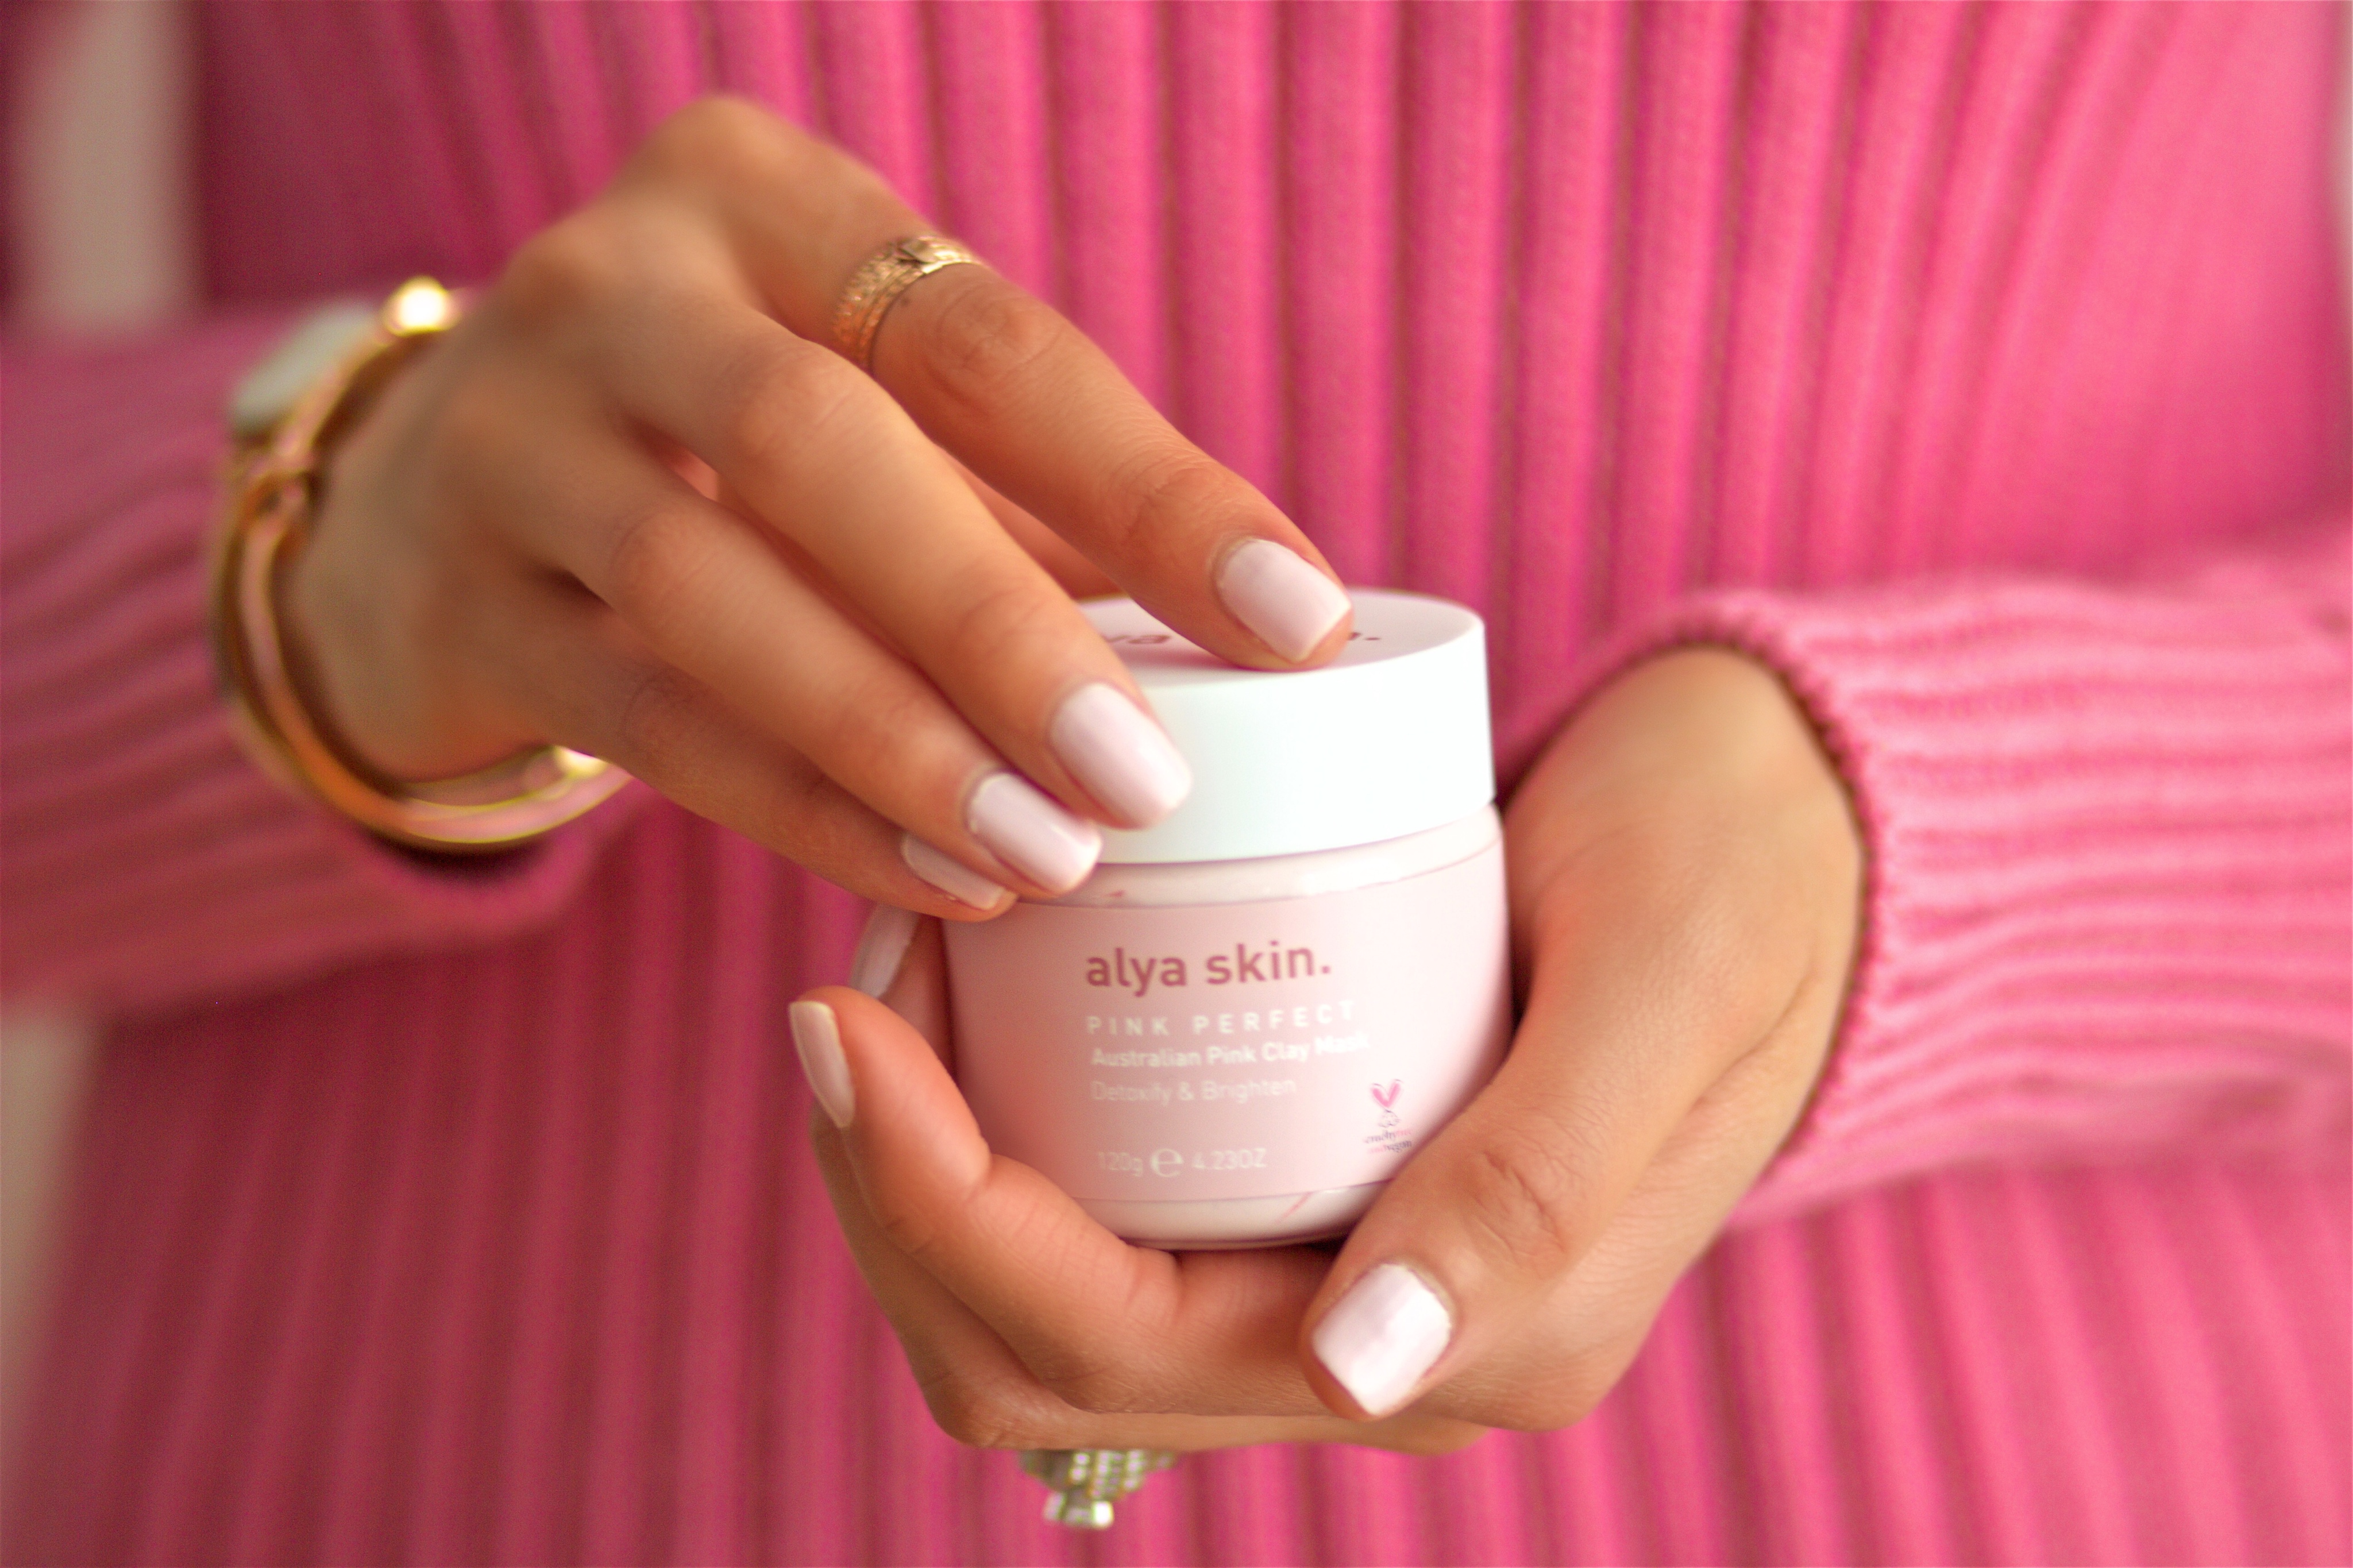 Alya Skin: Australian Pink Clay Mask Review - Style Contour